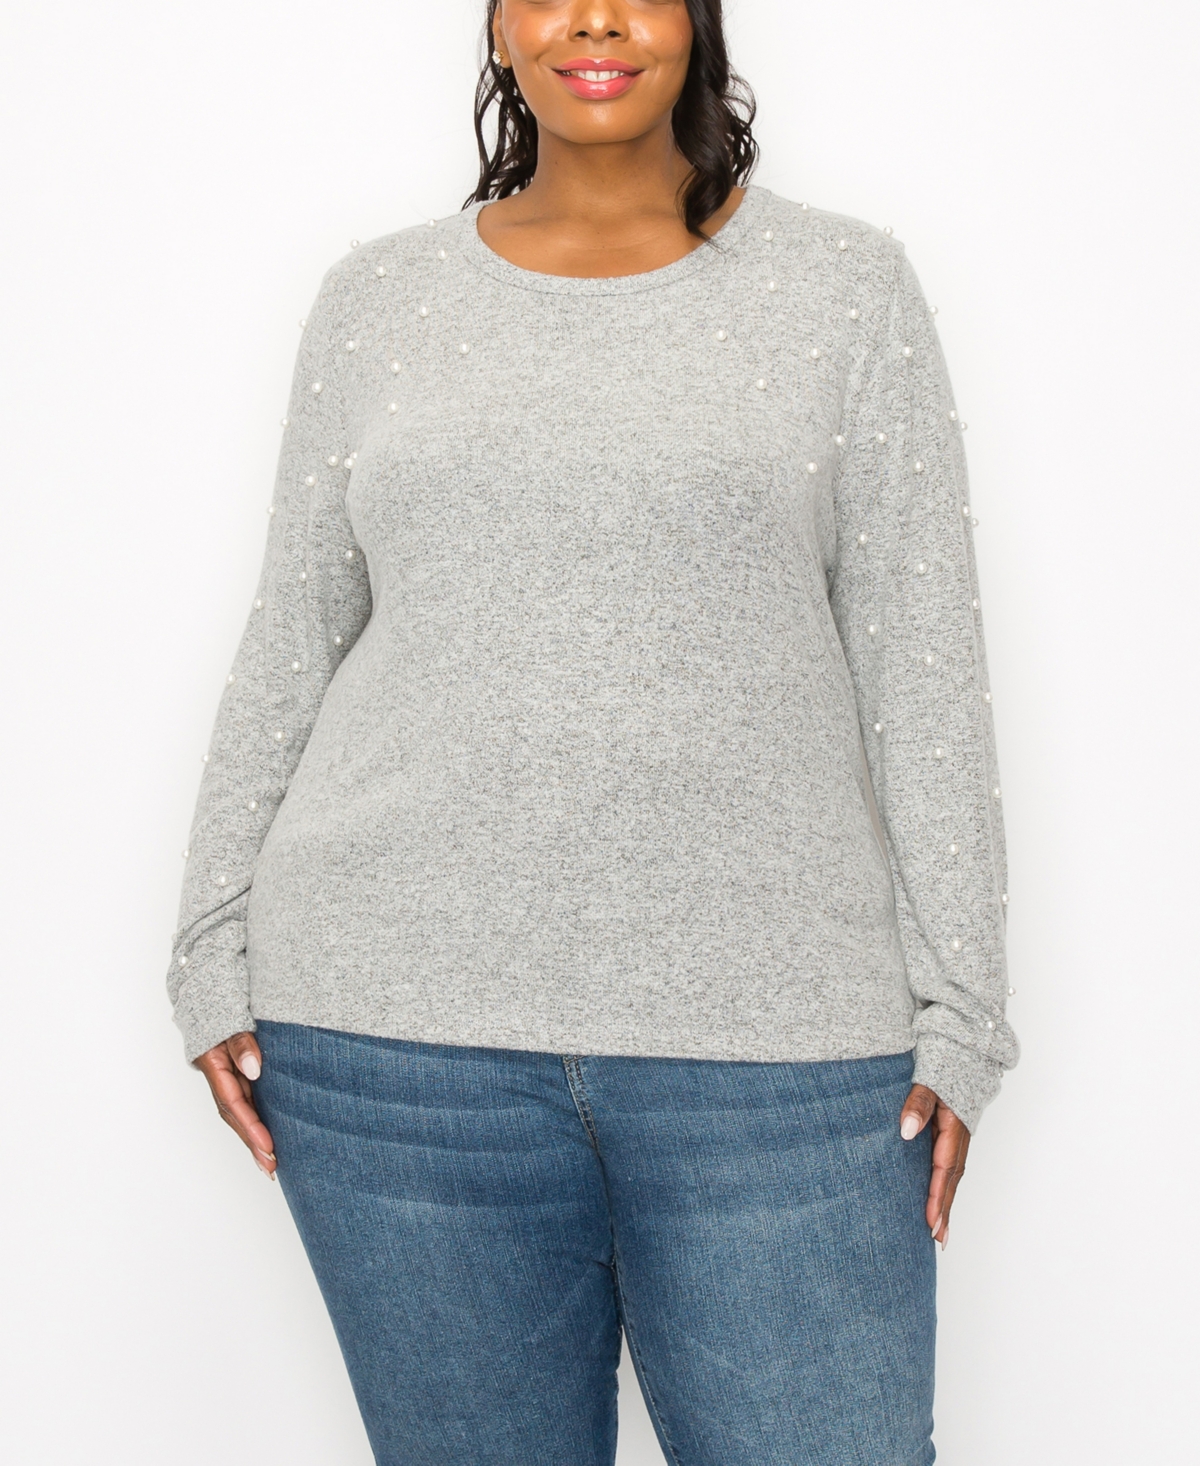 Plus Size Long Sleeve Pullover Top with Imitation Pearls - Heather Gray